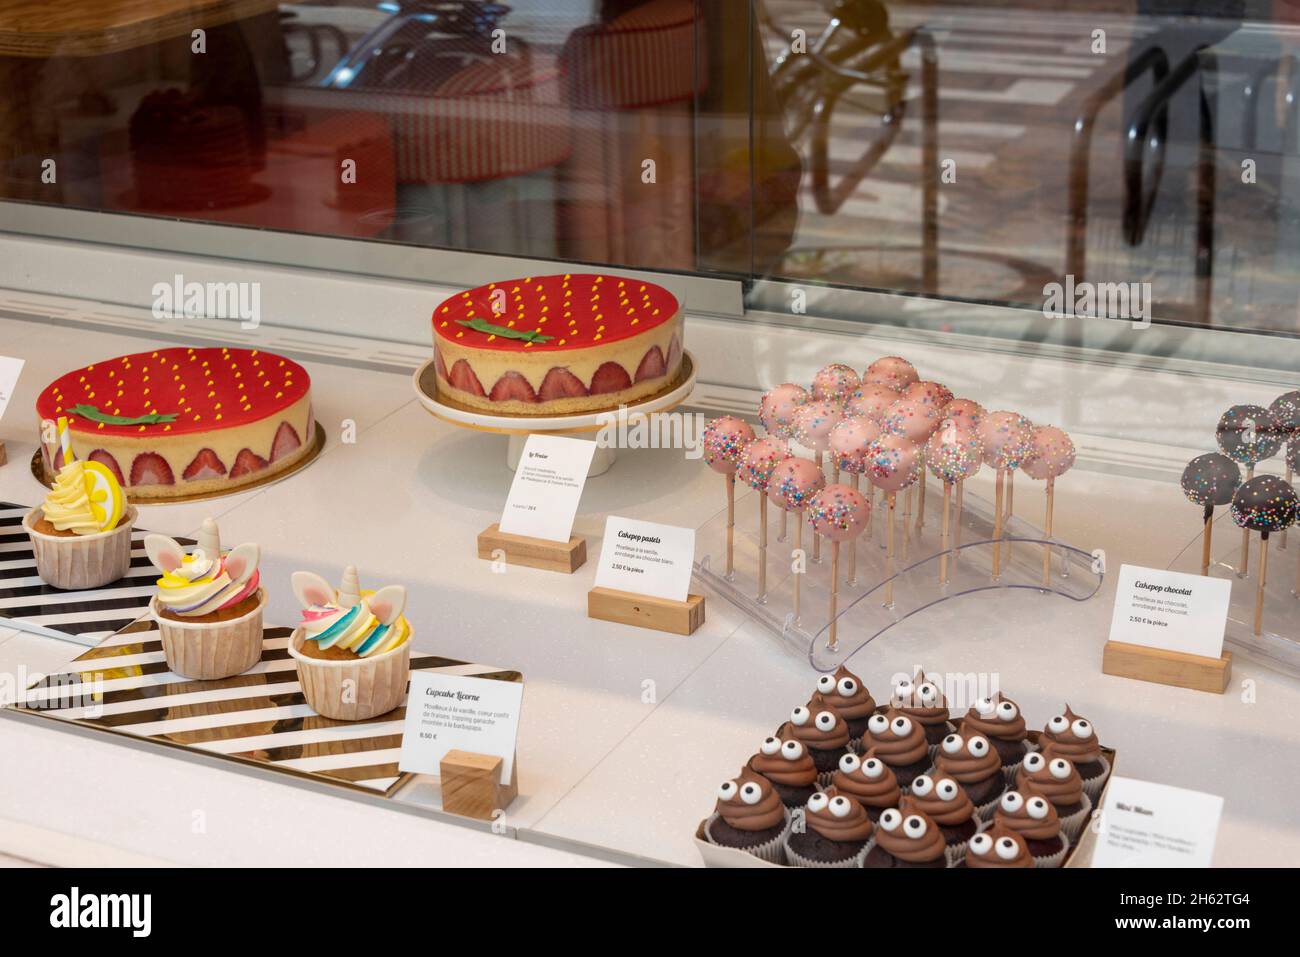 france,paris,display of a patisserie,pastry shop in paris Stock Photo